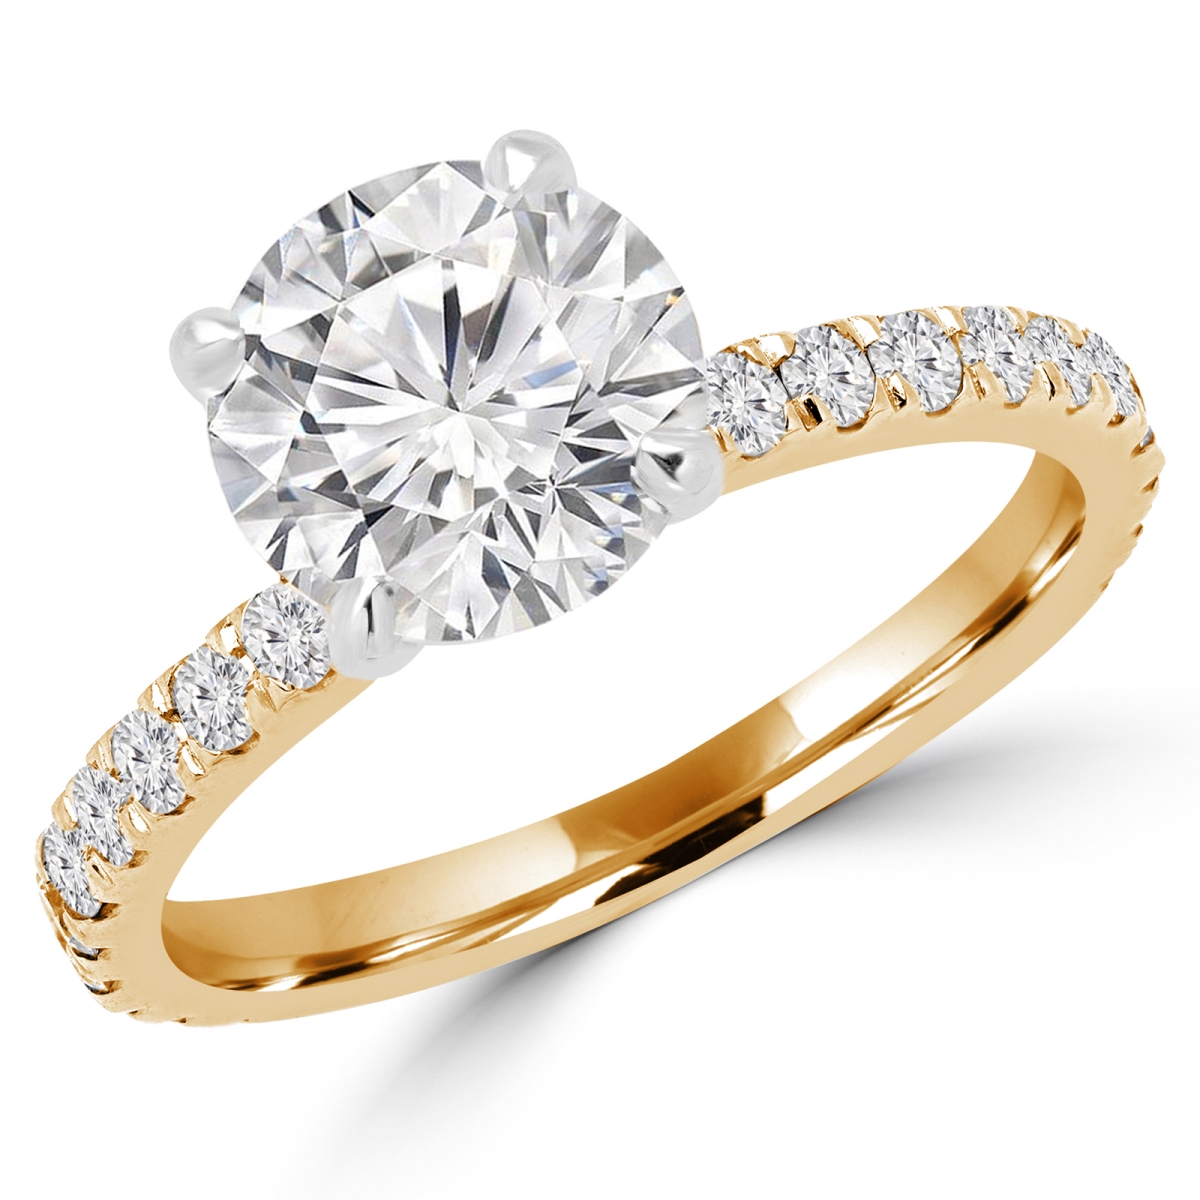 Picture of Majesty Diamonds MD160340-3.25 1 CTW Round Cut Diamond Multi Stone Engagement Ring in 14K Yellow Gold - Size 3.25